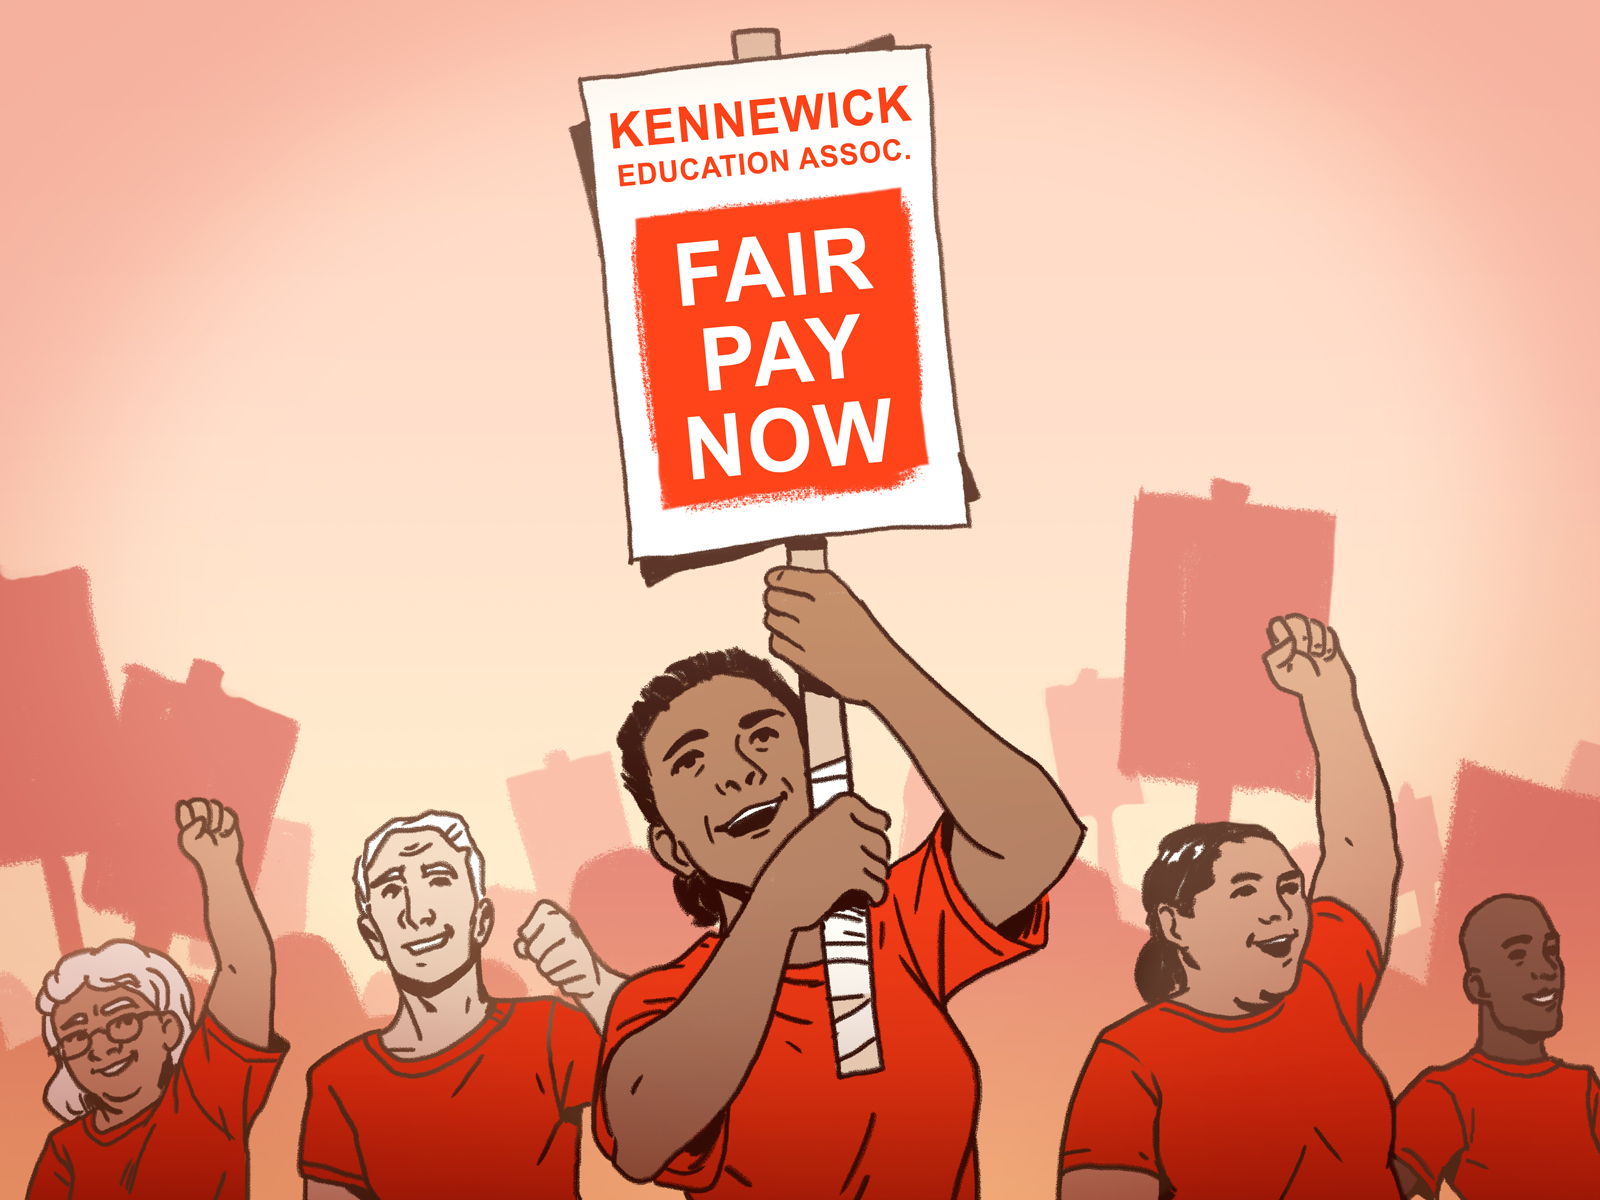 Graphic art portrays 5 teachers in red t-shirts in the forefront of a crowd where other people are holding picket signs. The central figure holds a sign reading : "Kennewick Education Associatio-Fair Pay Now." Two of the other people flanking her have their fists upraised.